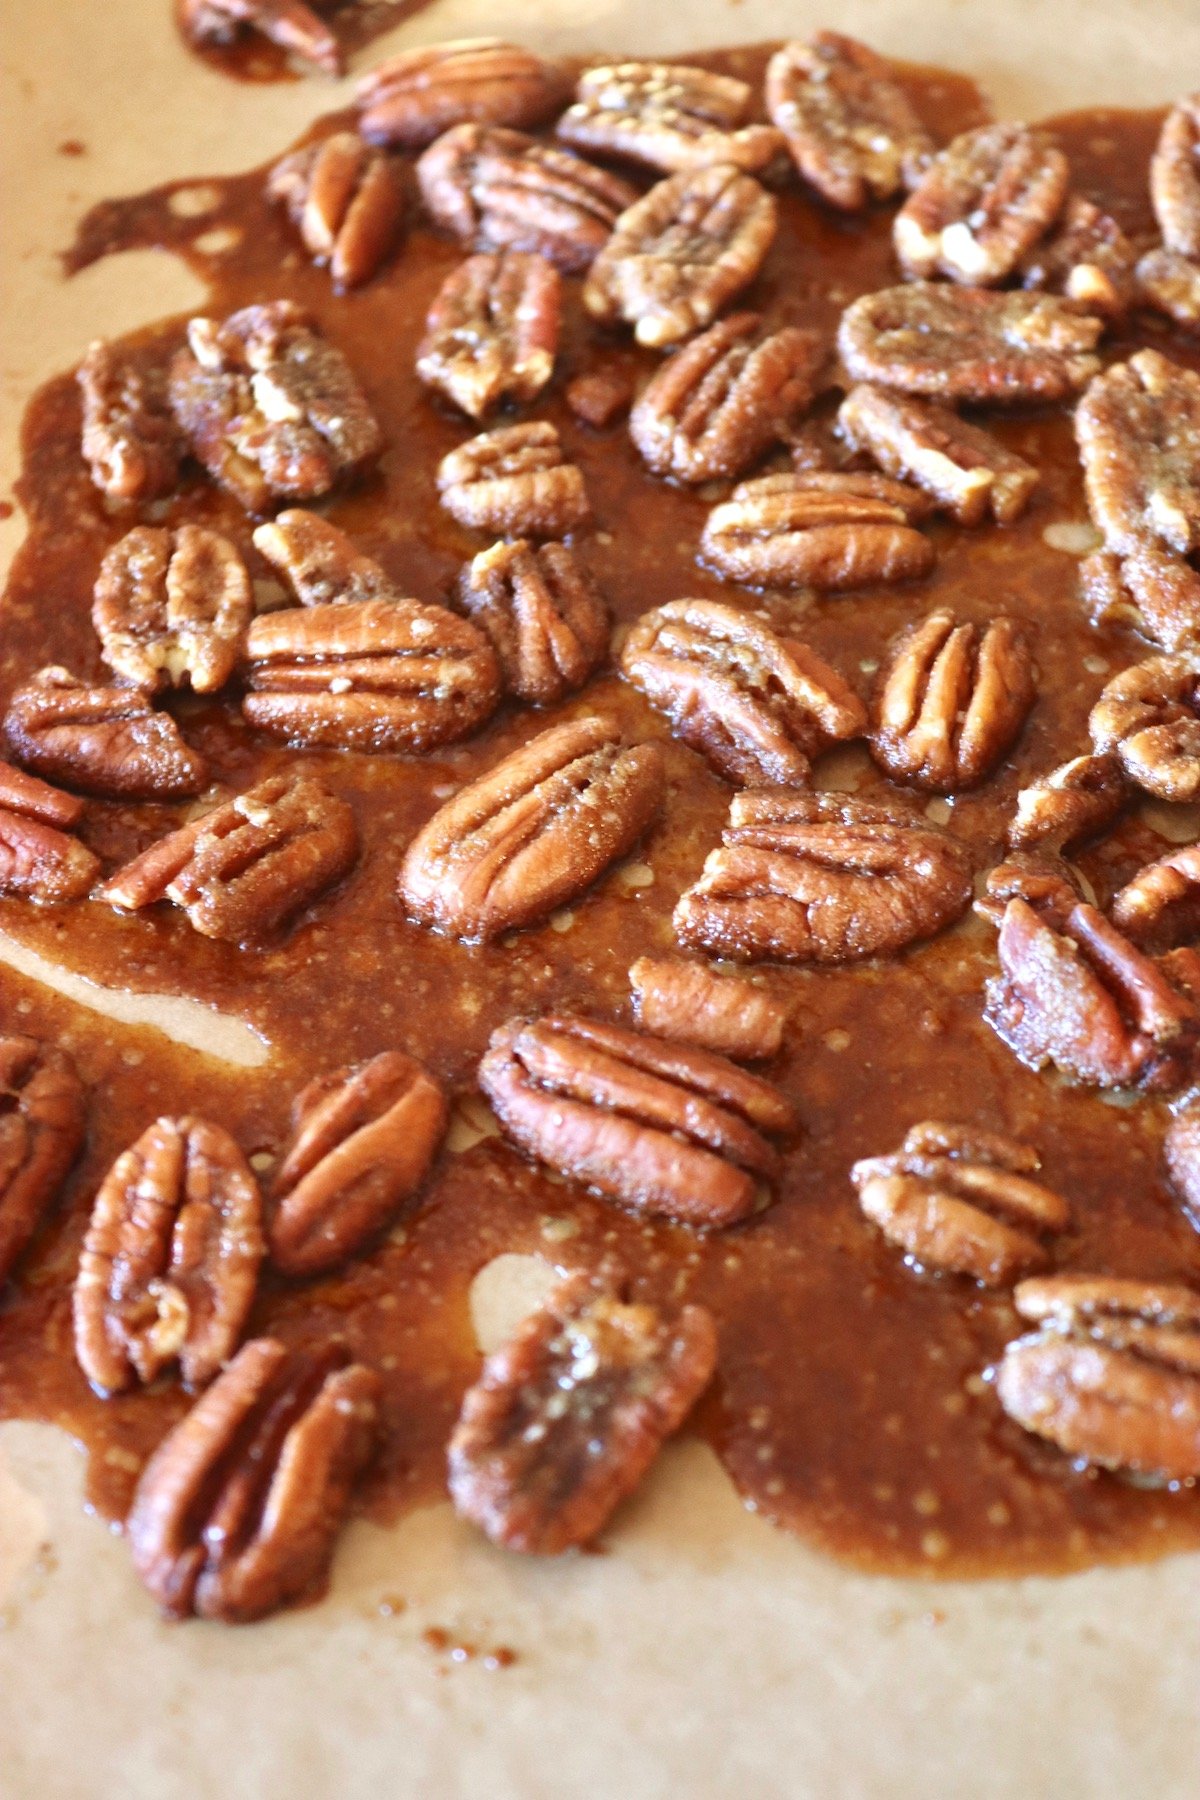 caramelized pecans with spice mix aspread out on baking sheet